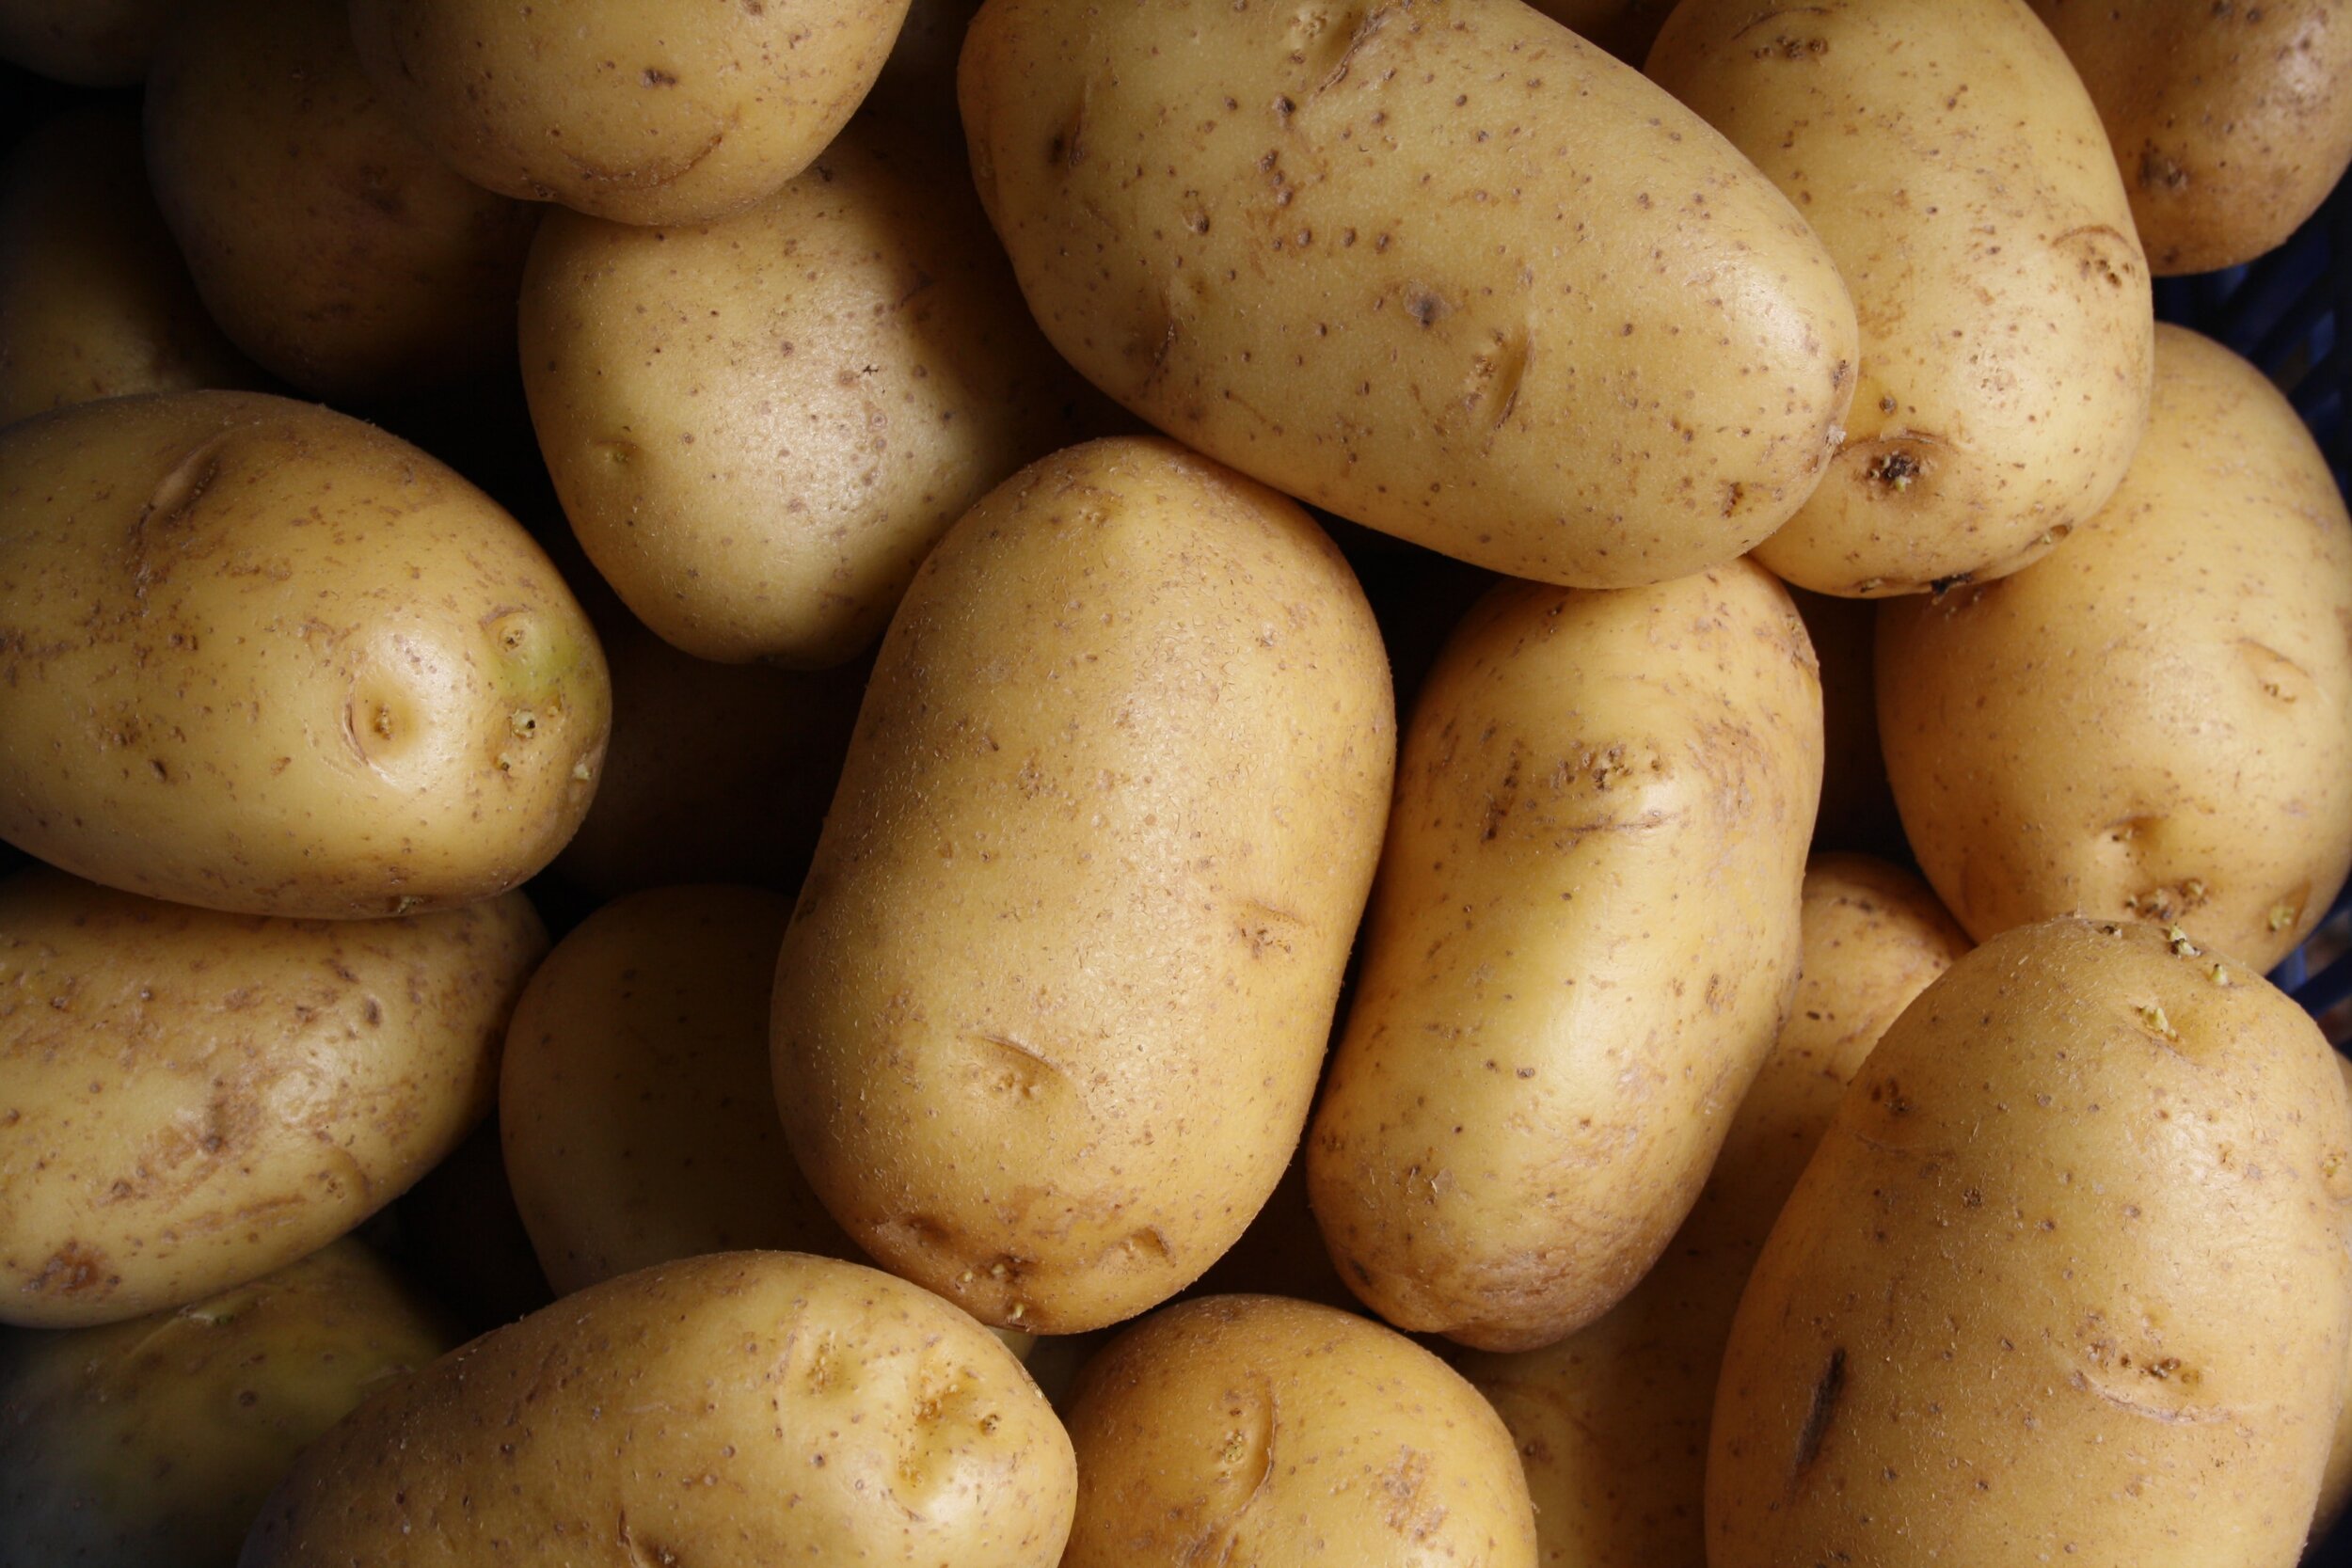 McCain foods donates 20 million pounds of potatoes to combat food insecurity during pandemic.